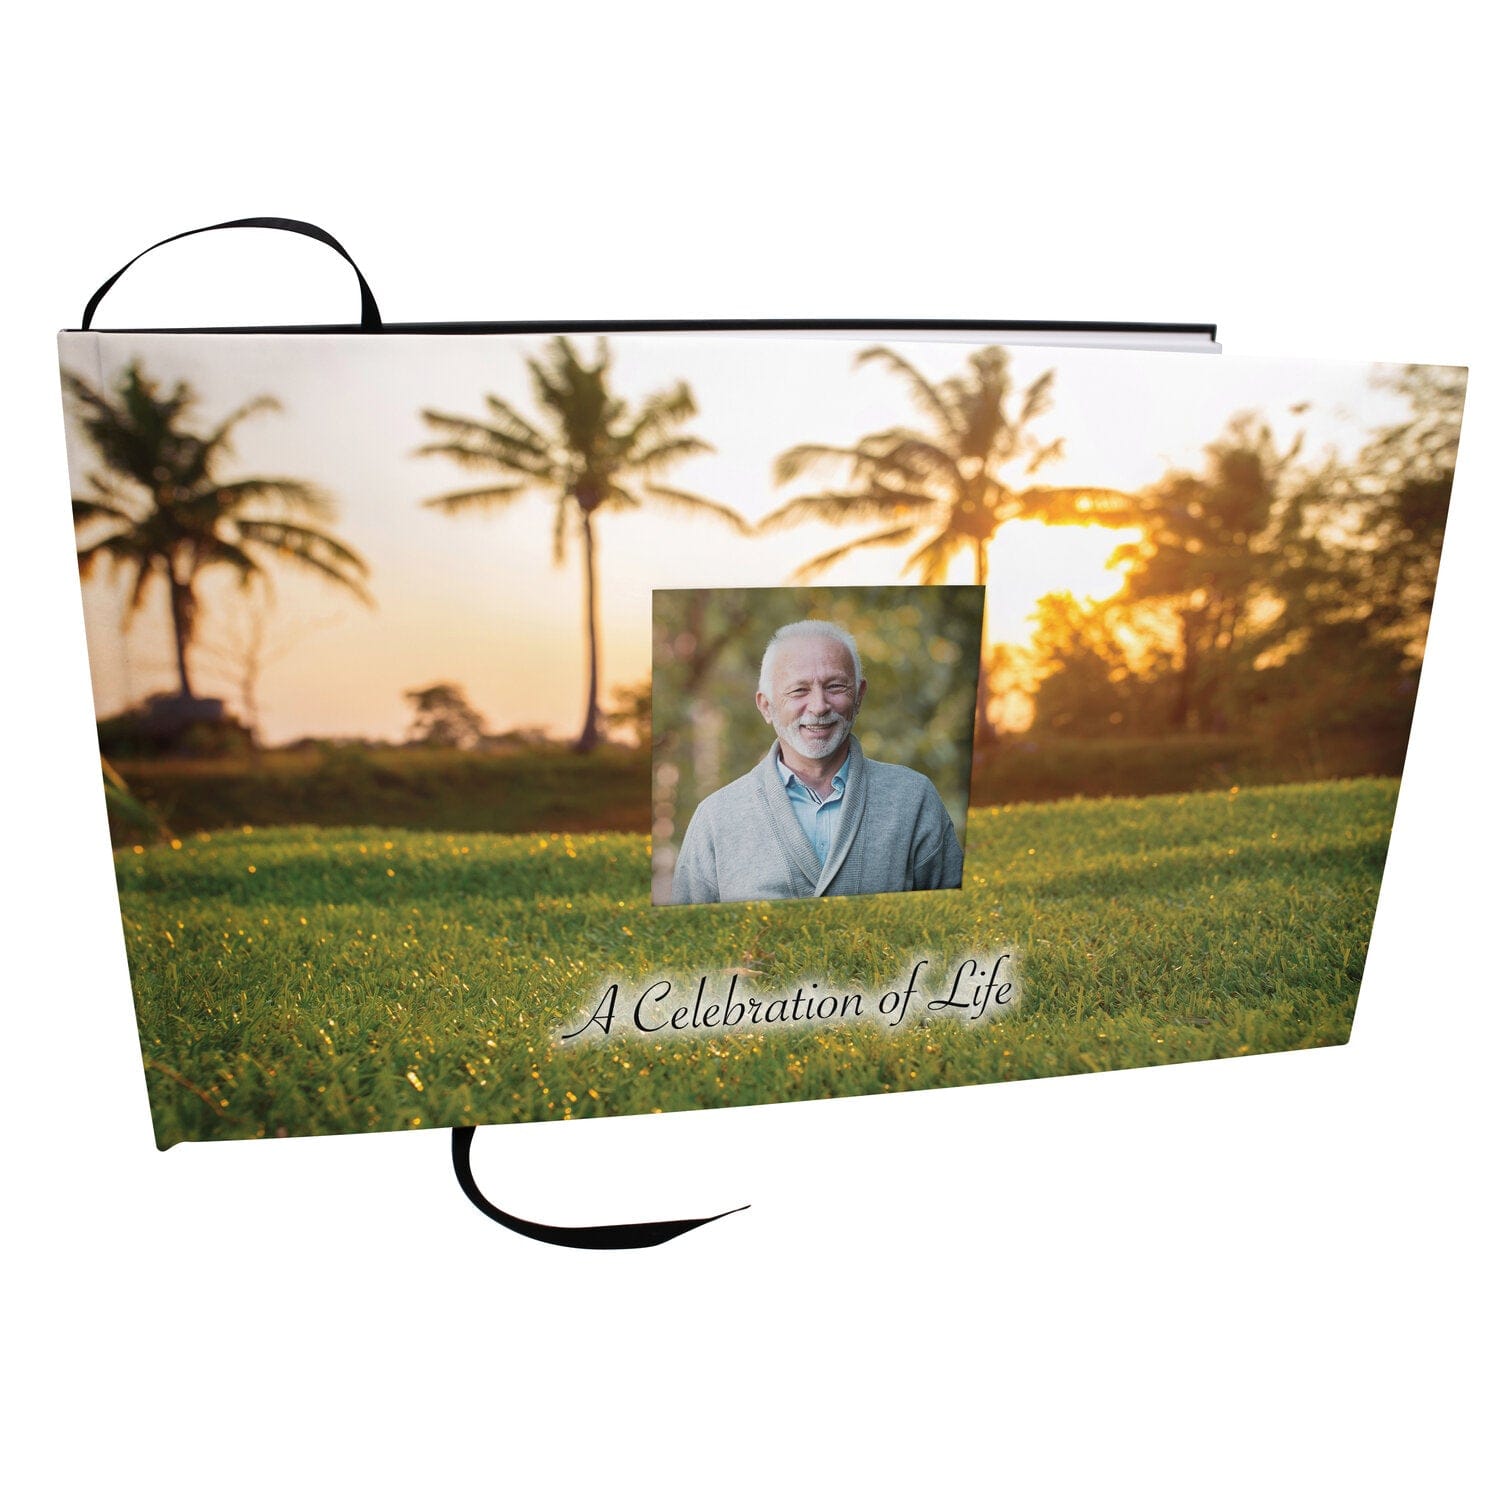 Commemorative Cremation Urns One More Round Golf Matching Themed 'Celebration of Life' Guest Book for Funeral or Memorial Service